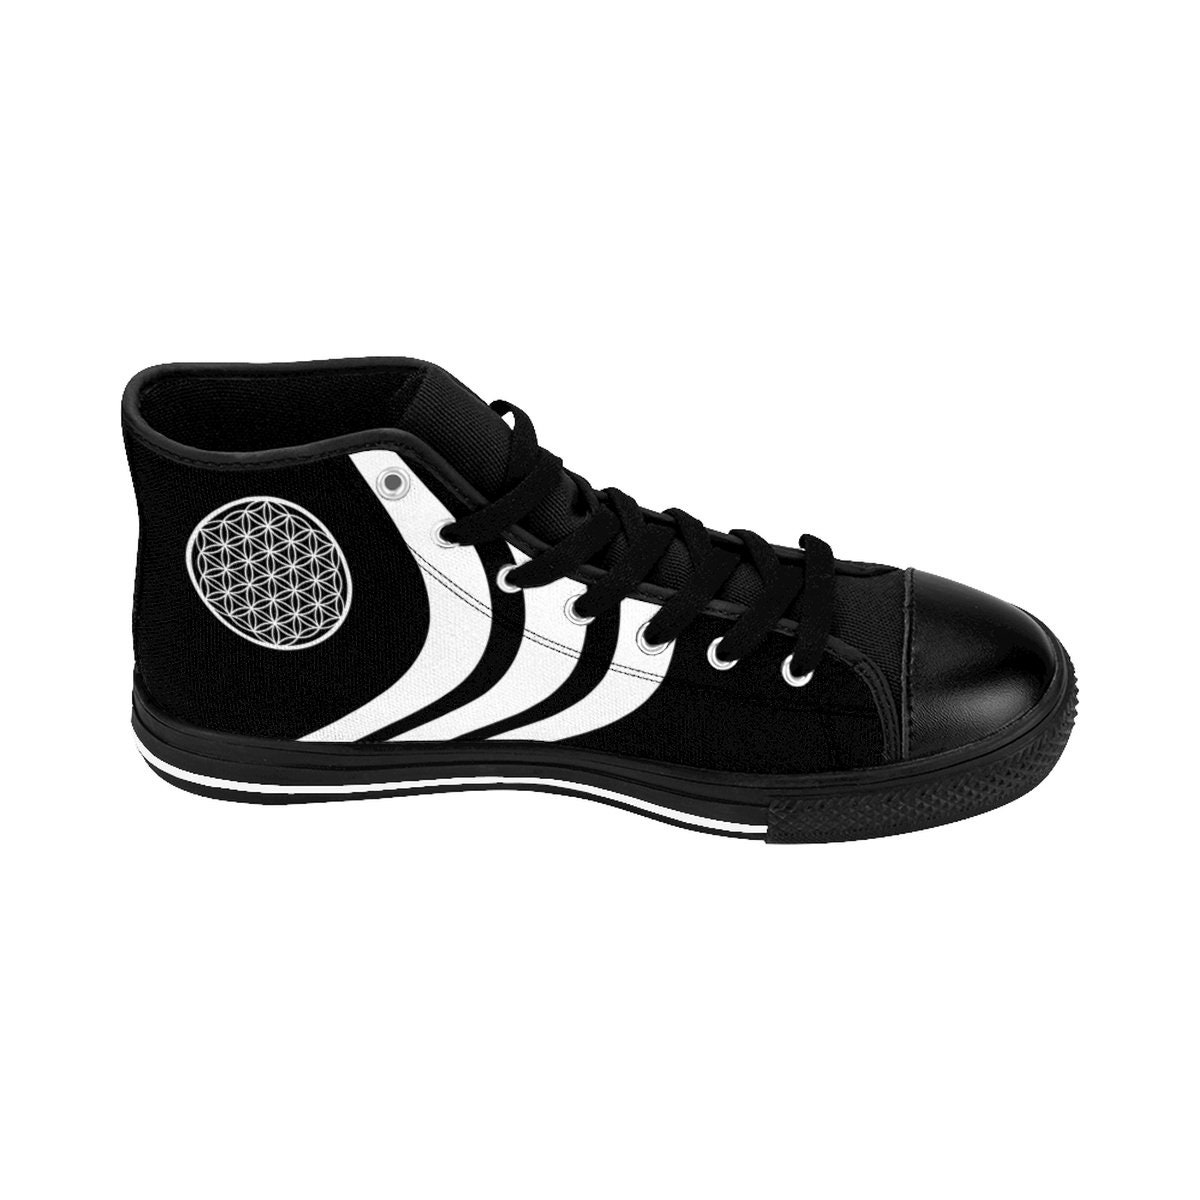 Sacred Geometry Flower of Life Shoes, Canvas Sneakers, Mens Festival Outfit Geometric Black and White Techno Rave Clothing Psytrance Edm